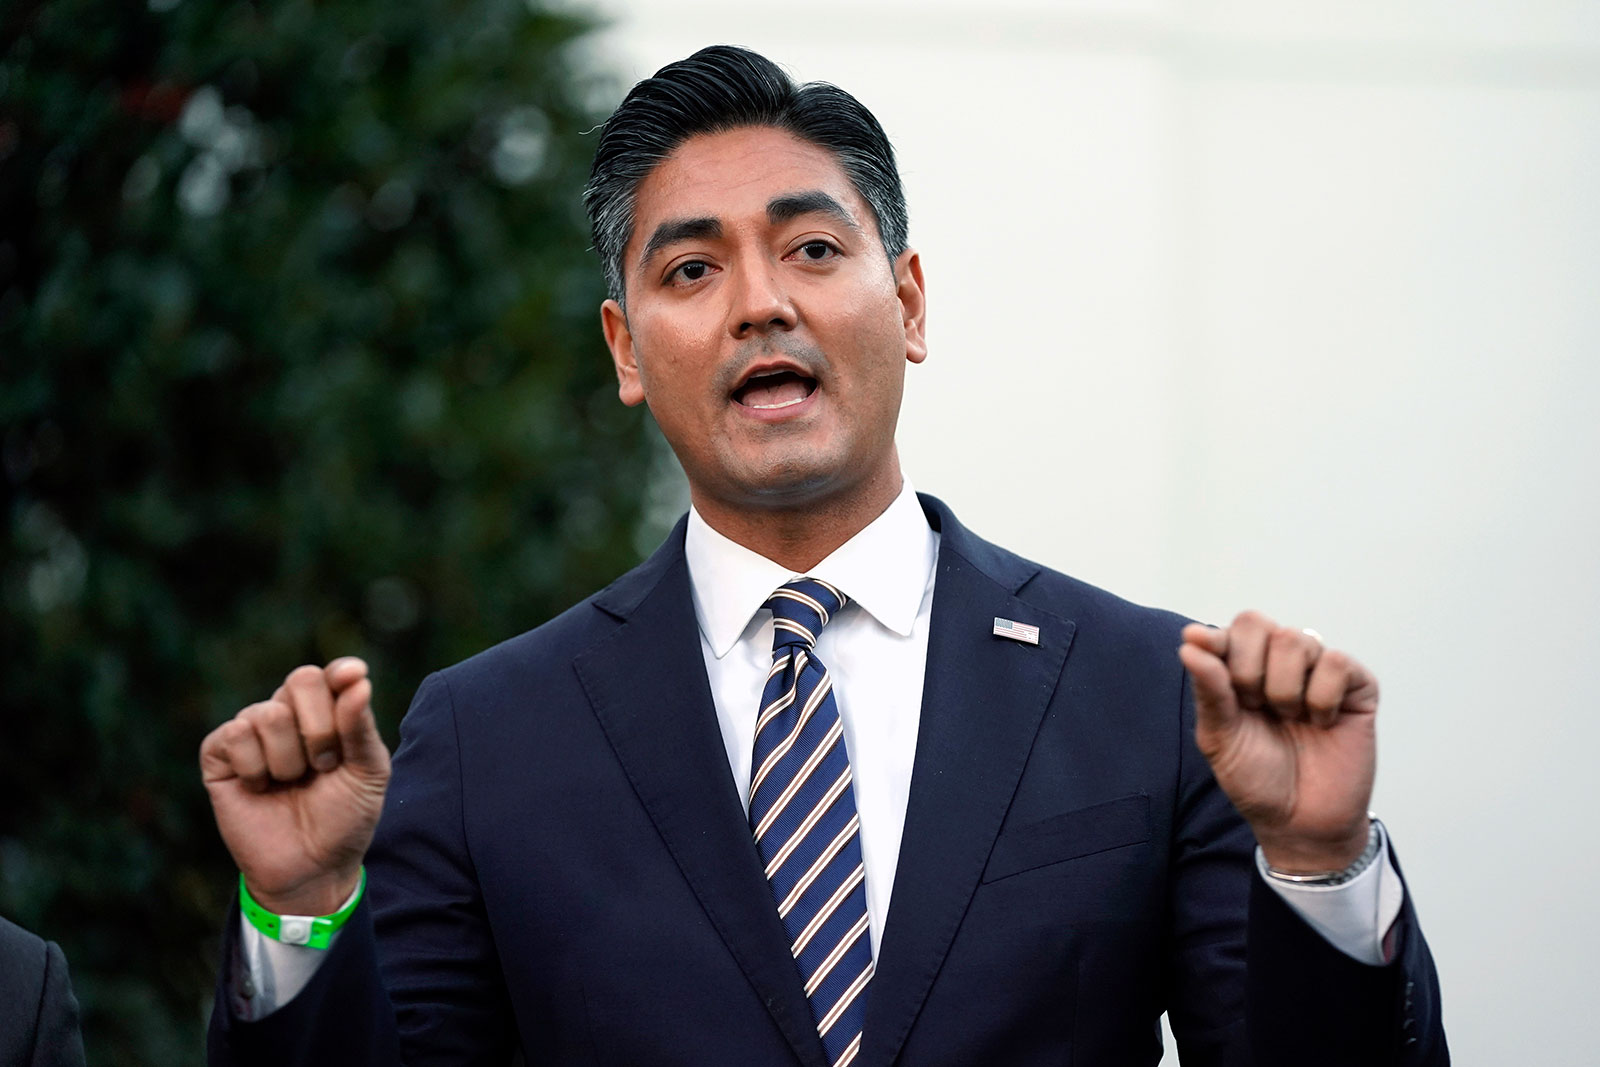 Cincinnati mayor Aftab Pureval speaks with reporters after meetings at the White House in Washington, DC, in 2021.